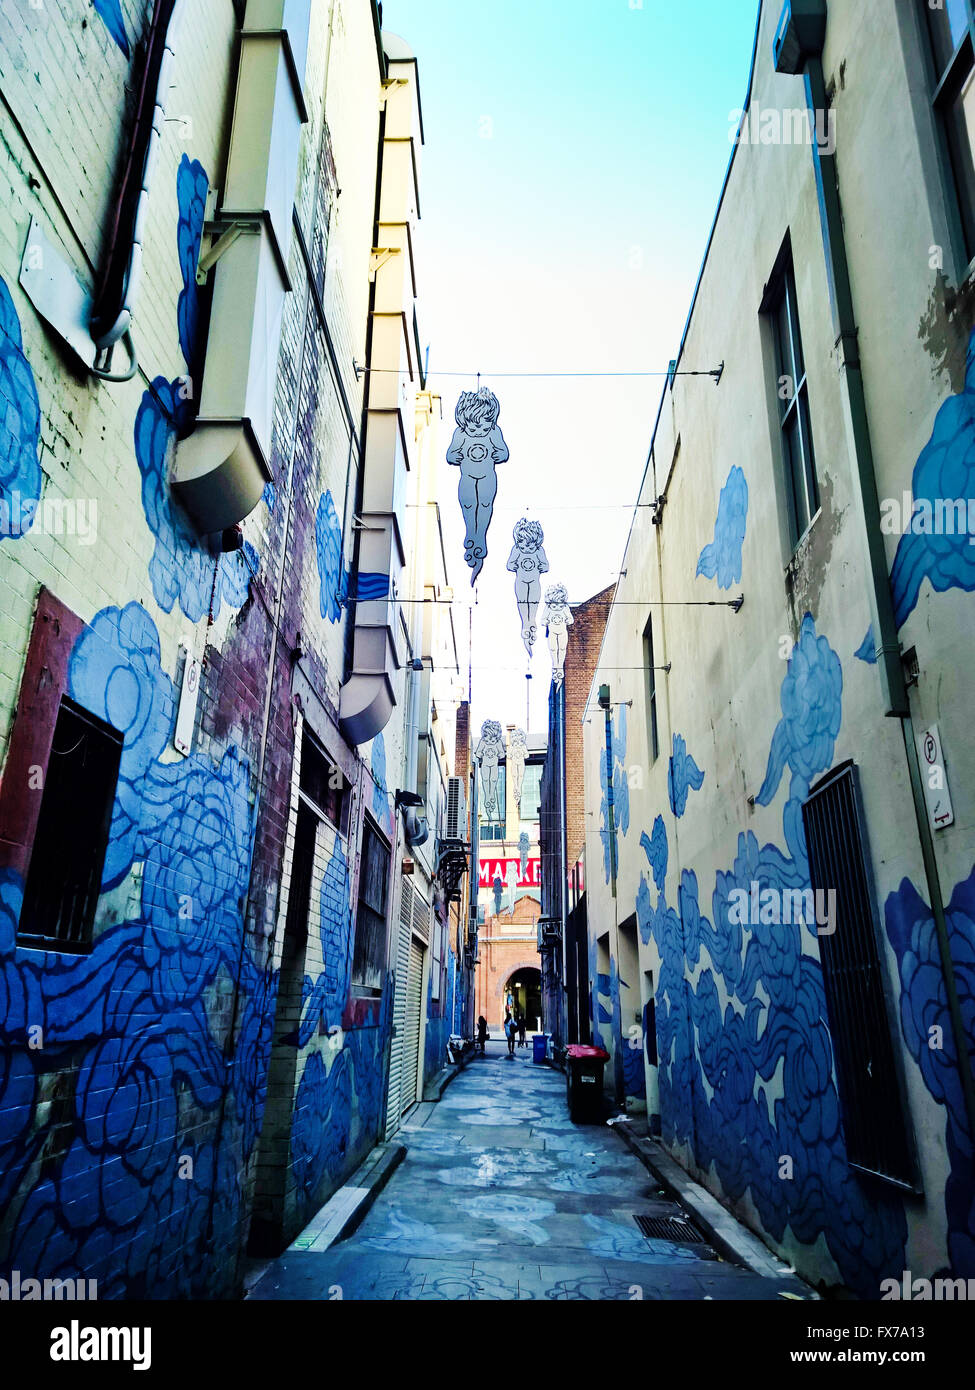 Side Alley artwork In Between Two Worlds by Jason Wing at Chinatown, Sydney, Australia Stock Photo